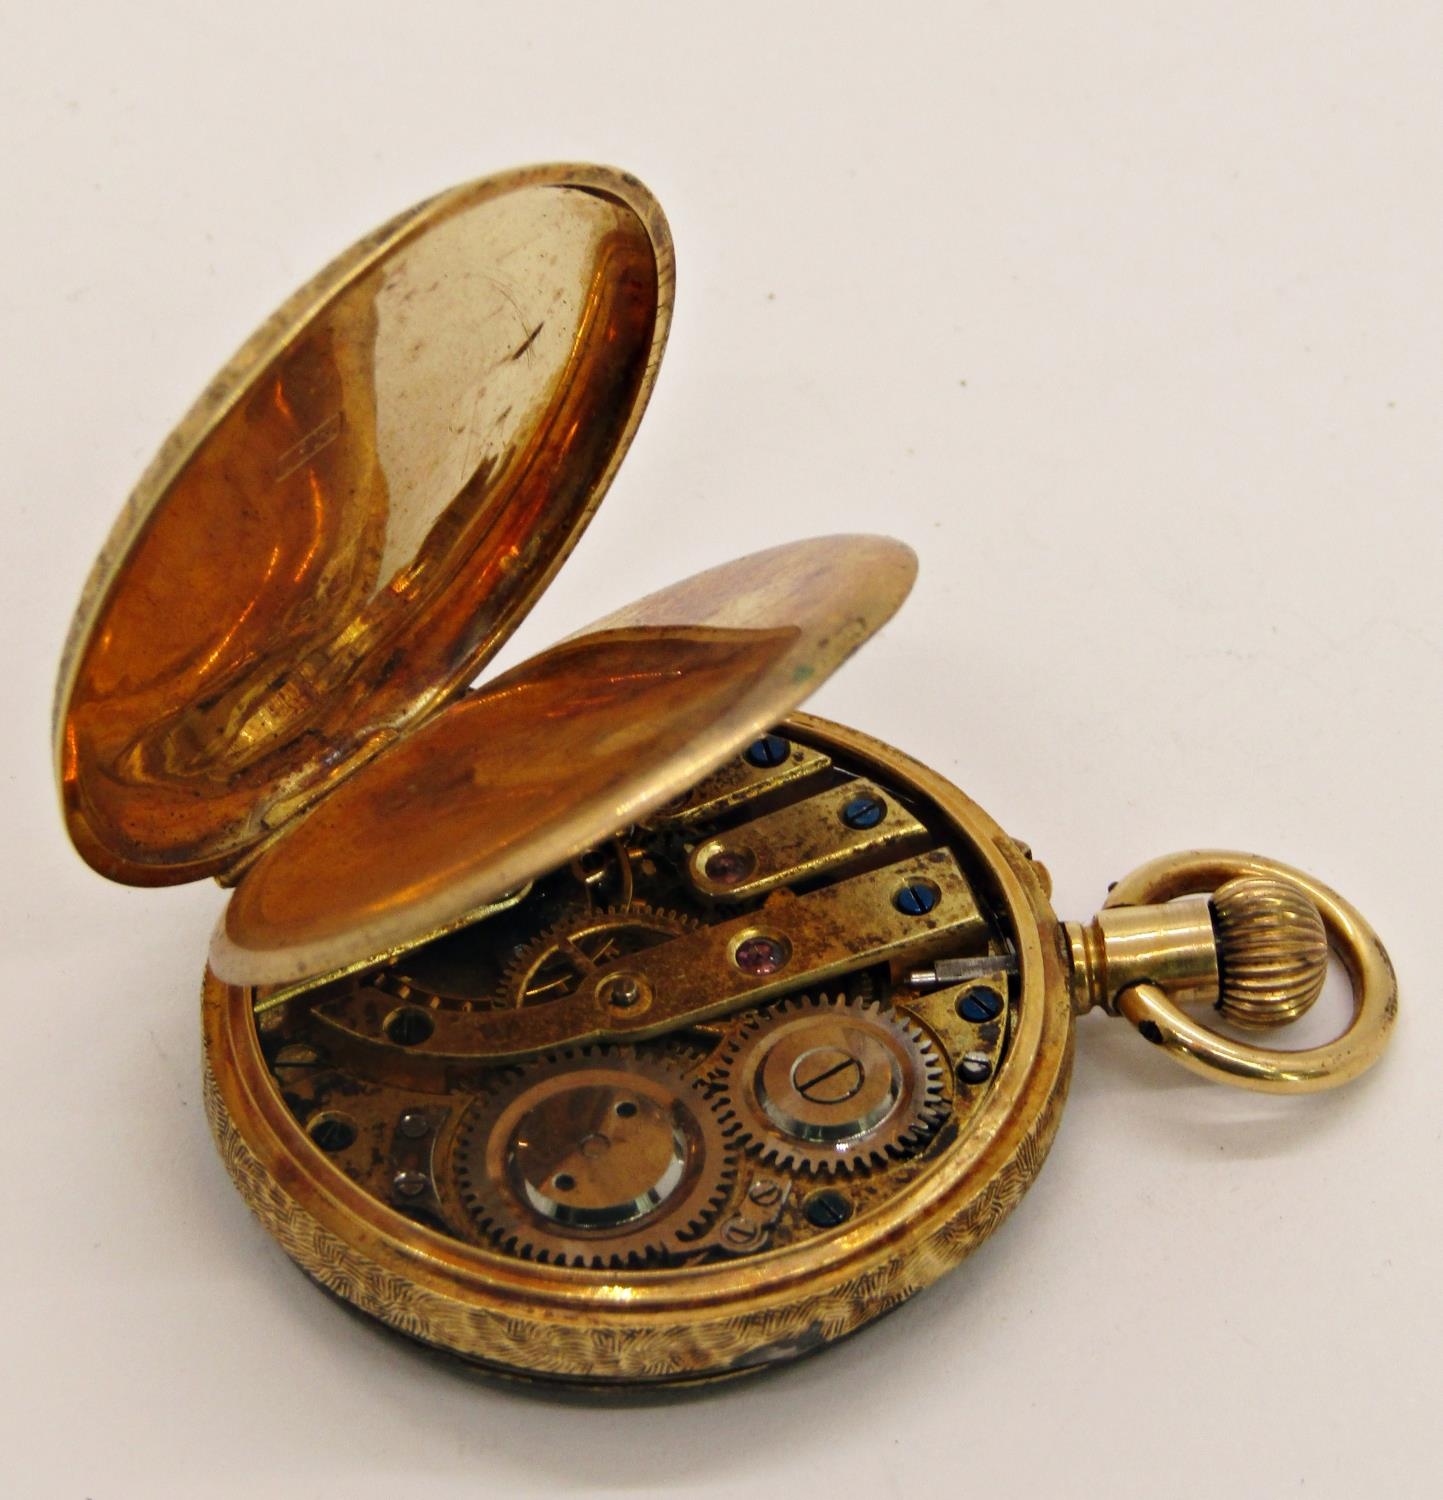 A 19th century continental fob watch with 18k engraved casework and chased dial - Image 4 of 5